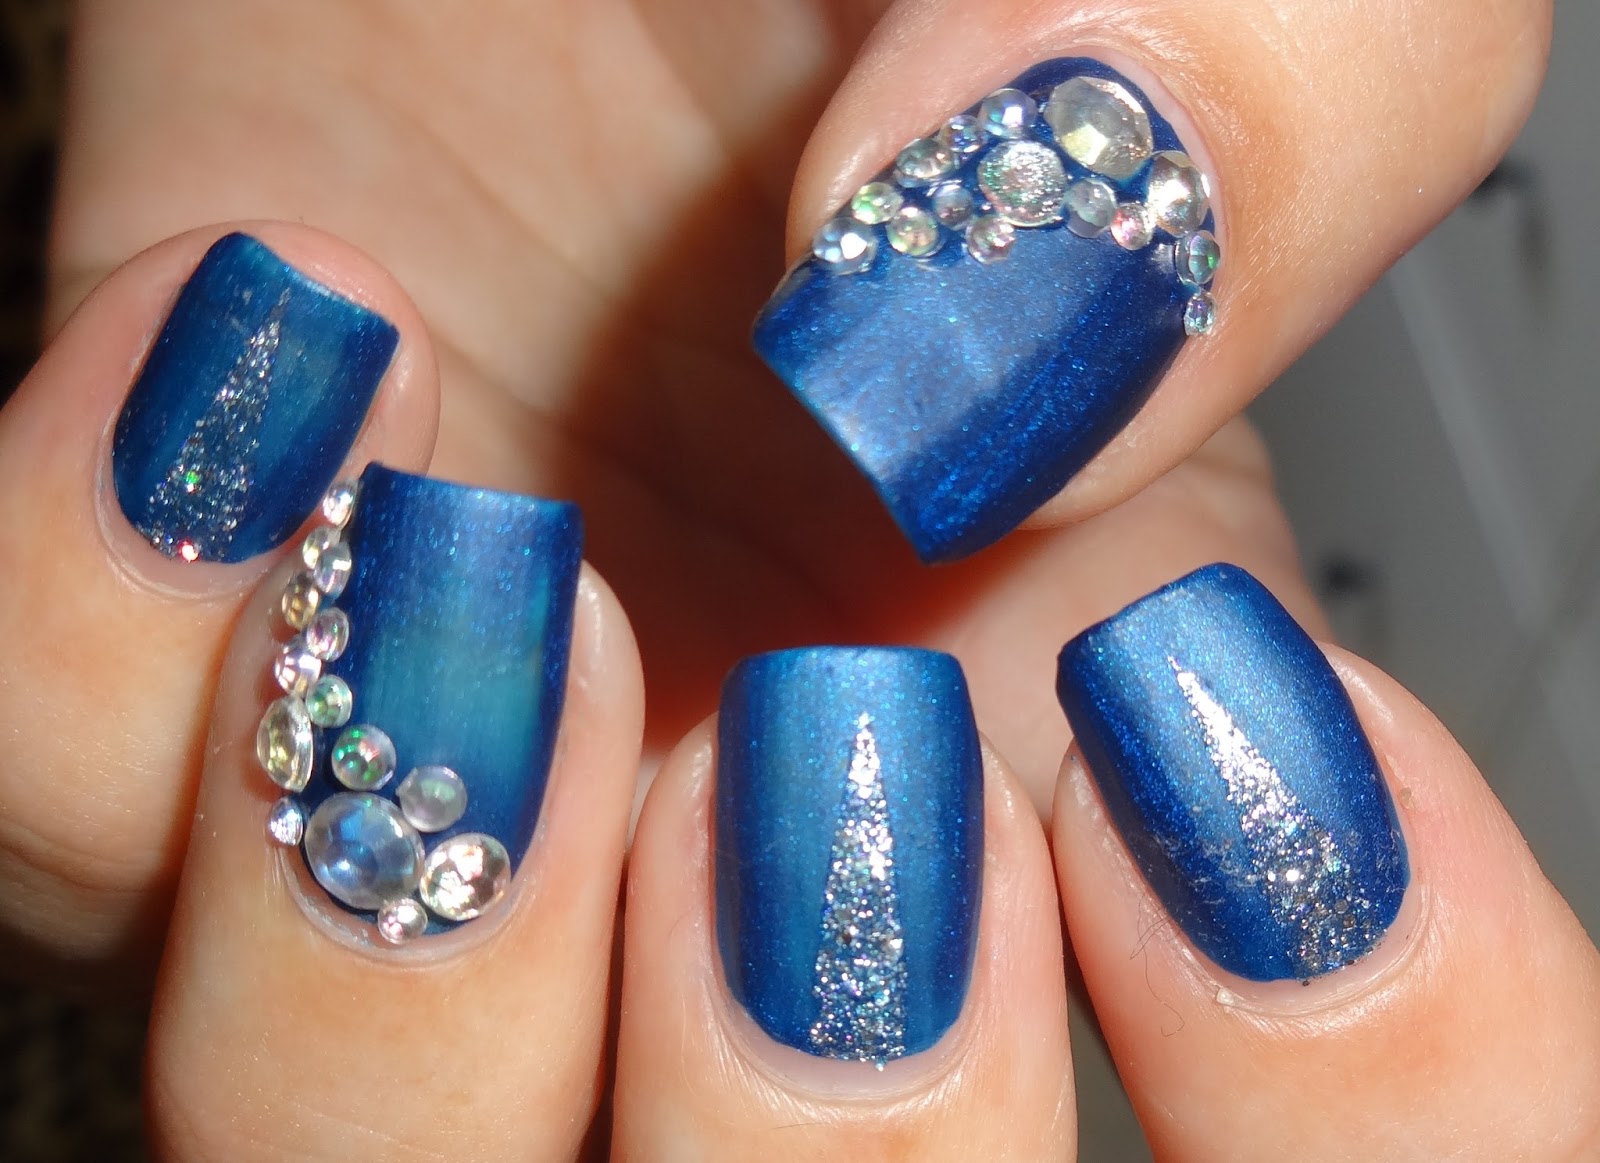 3D Nail Art London - The Best Nail Art Salons in London - wide 9